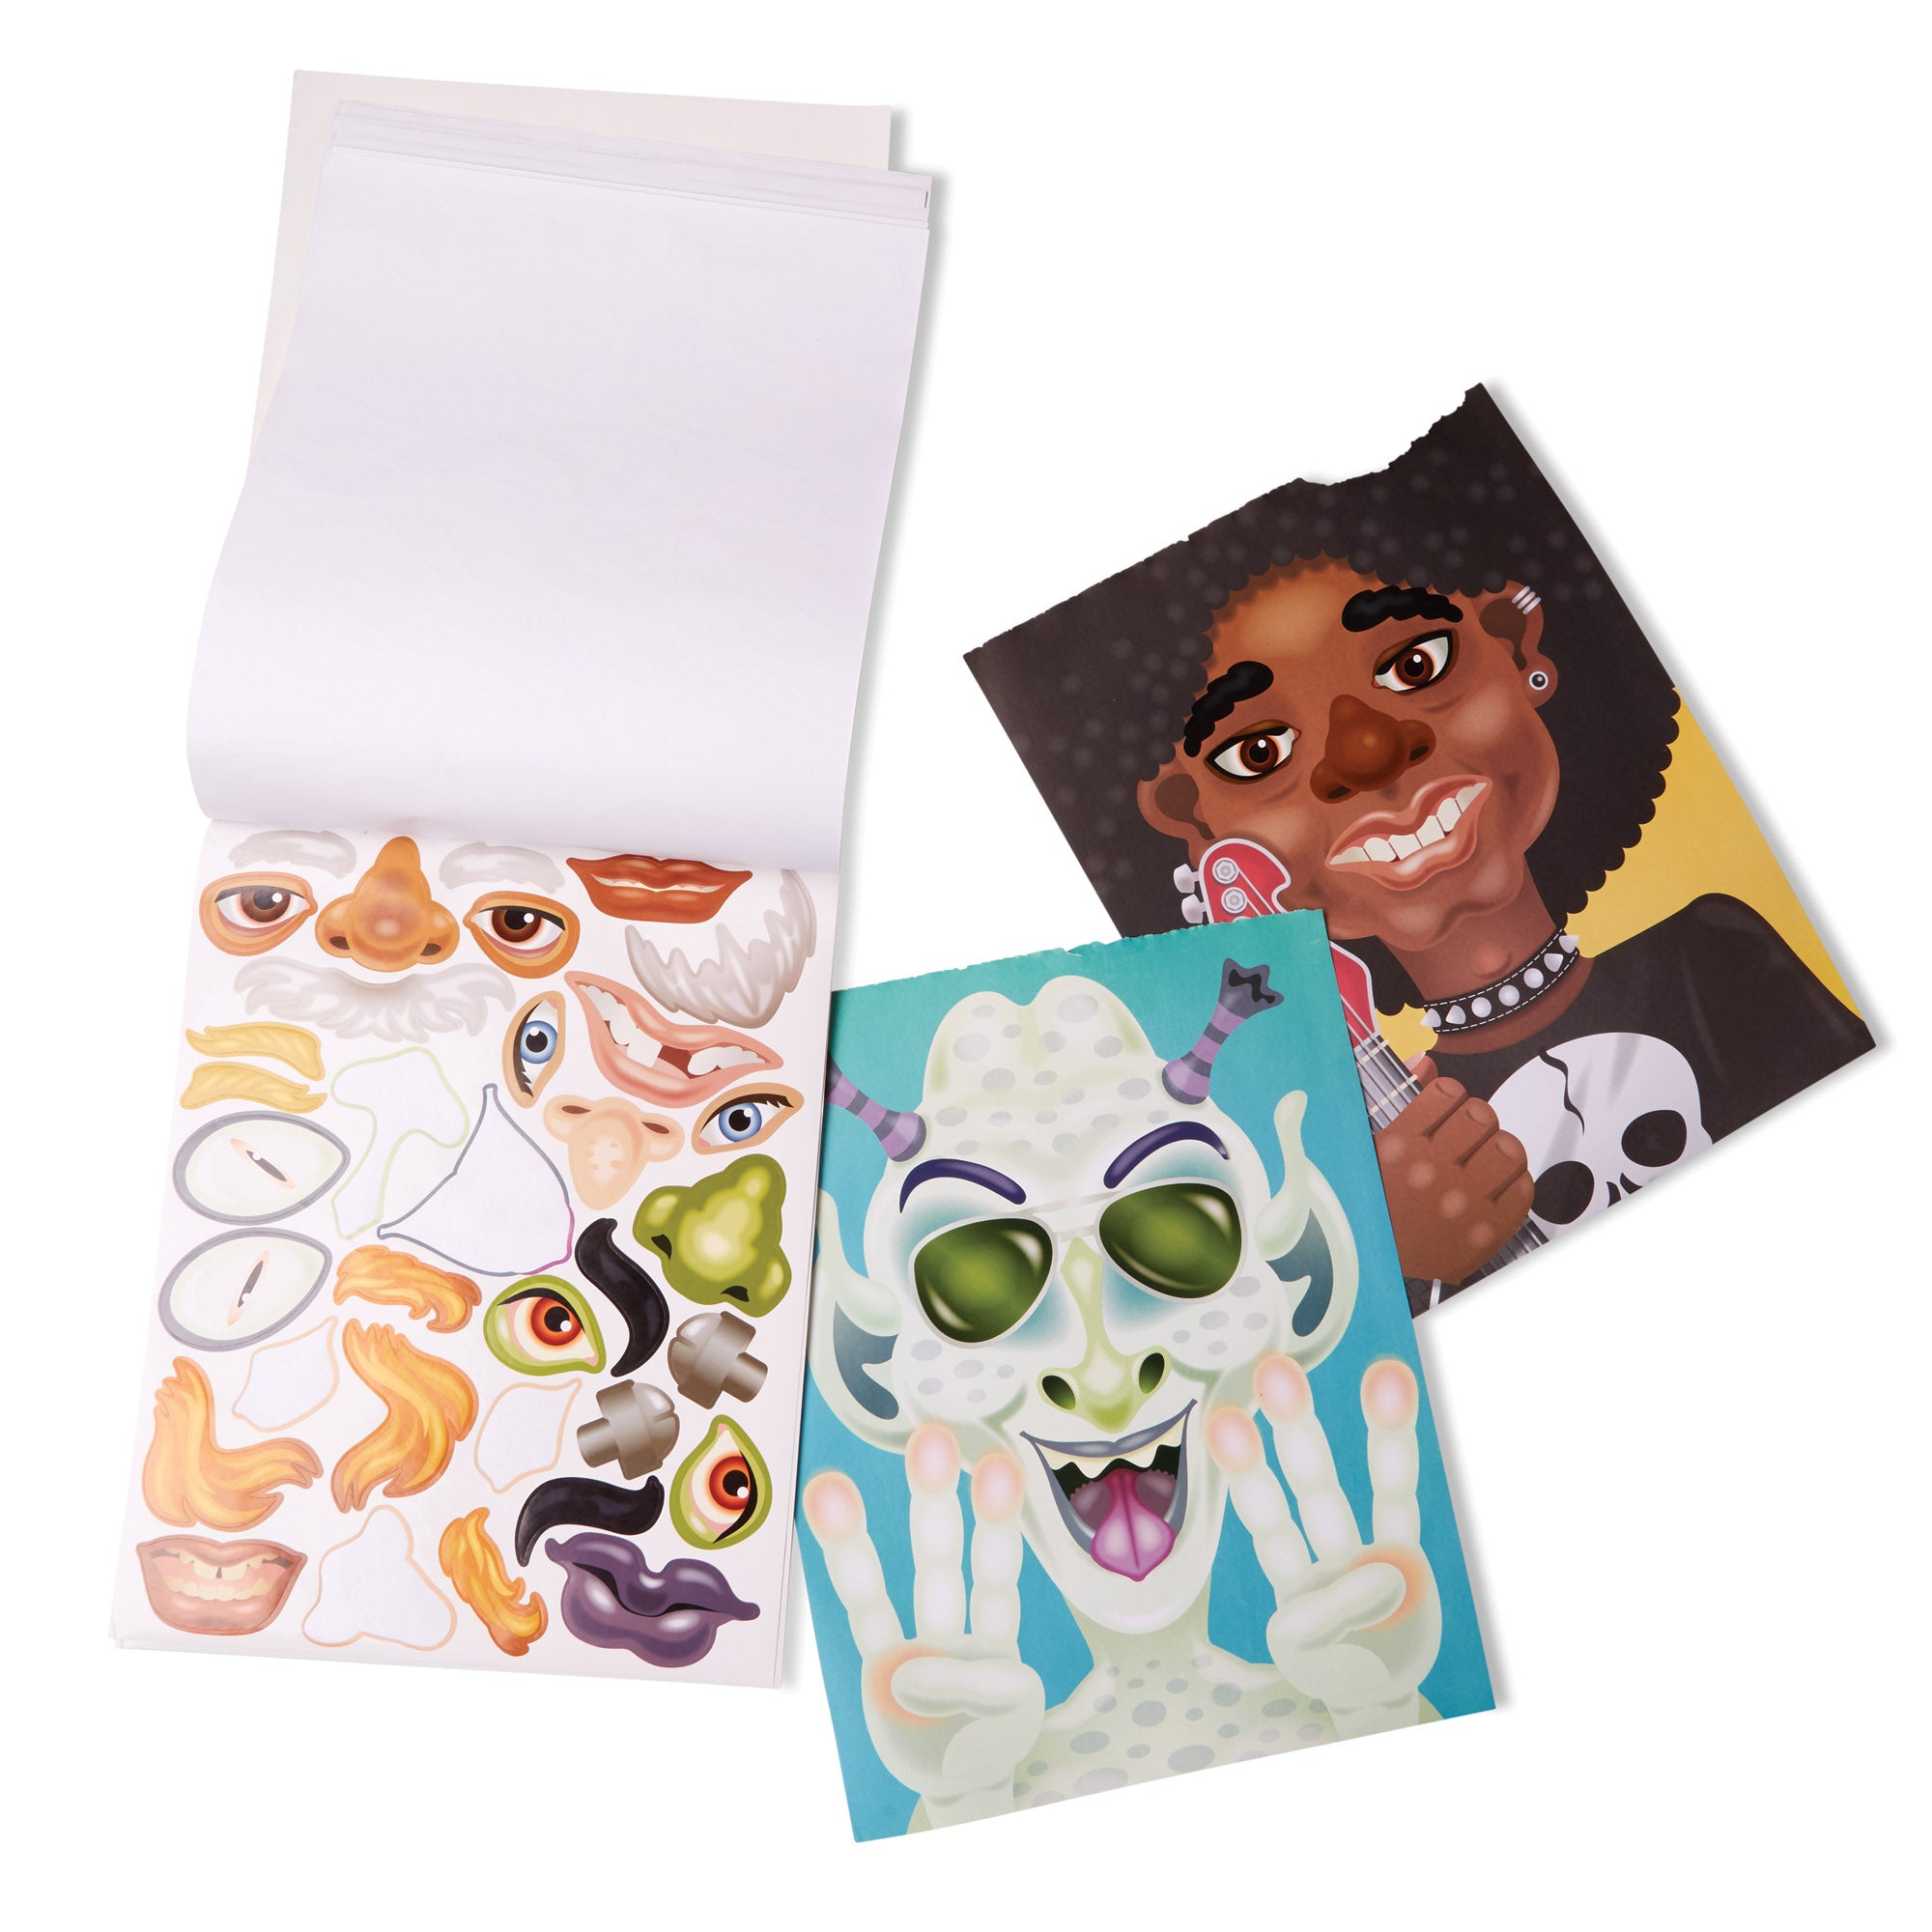 Make-a-Face Sticker Pad - Crazy Characters